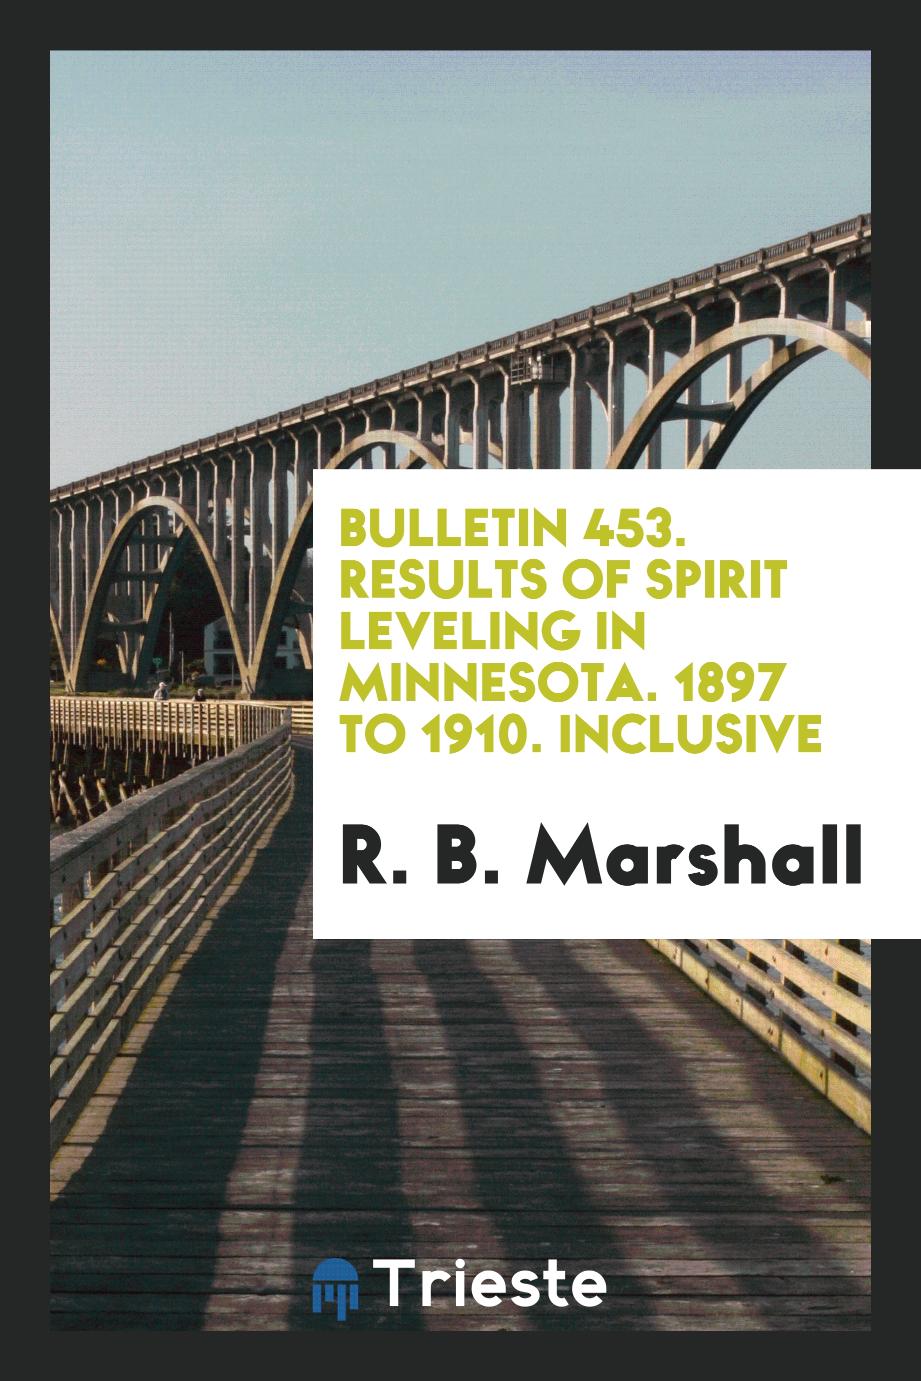 Bulletin 453. Results of Spirit Leveling in Minnesota. 1897 to 1910. Inclusive